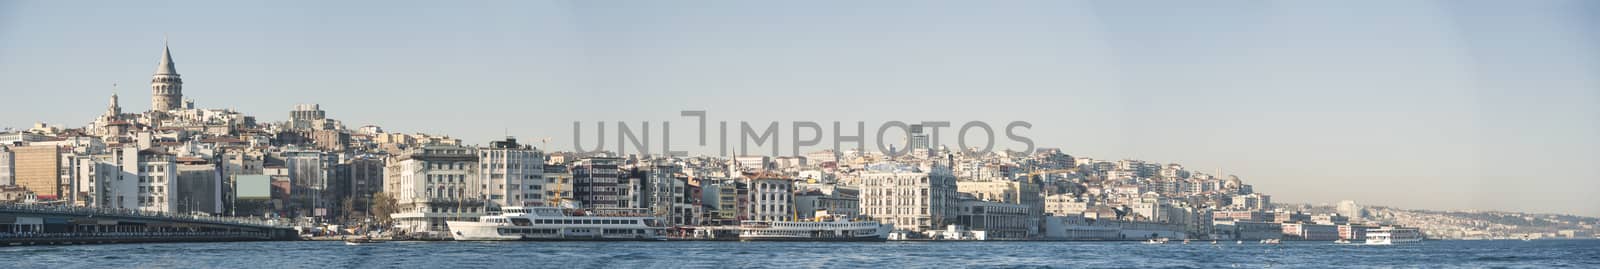 Panoramic cityscape over the Bosphorus River in Istanbul Turkey with a large residential area and Galata Tower